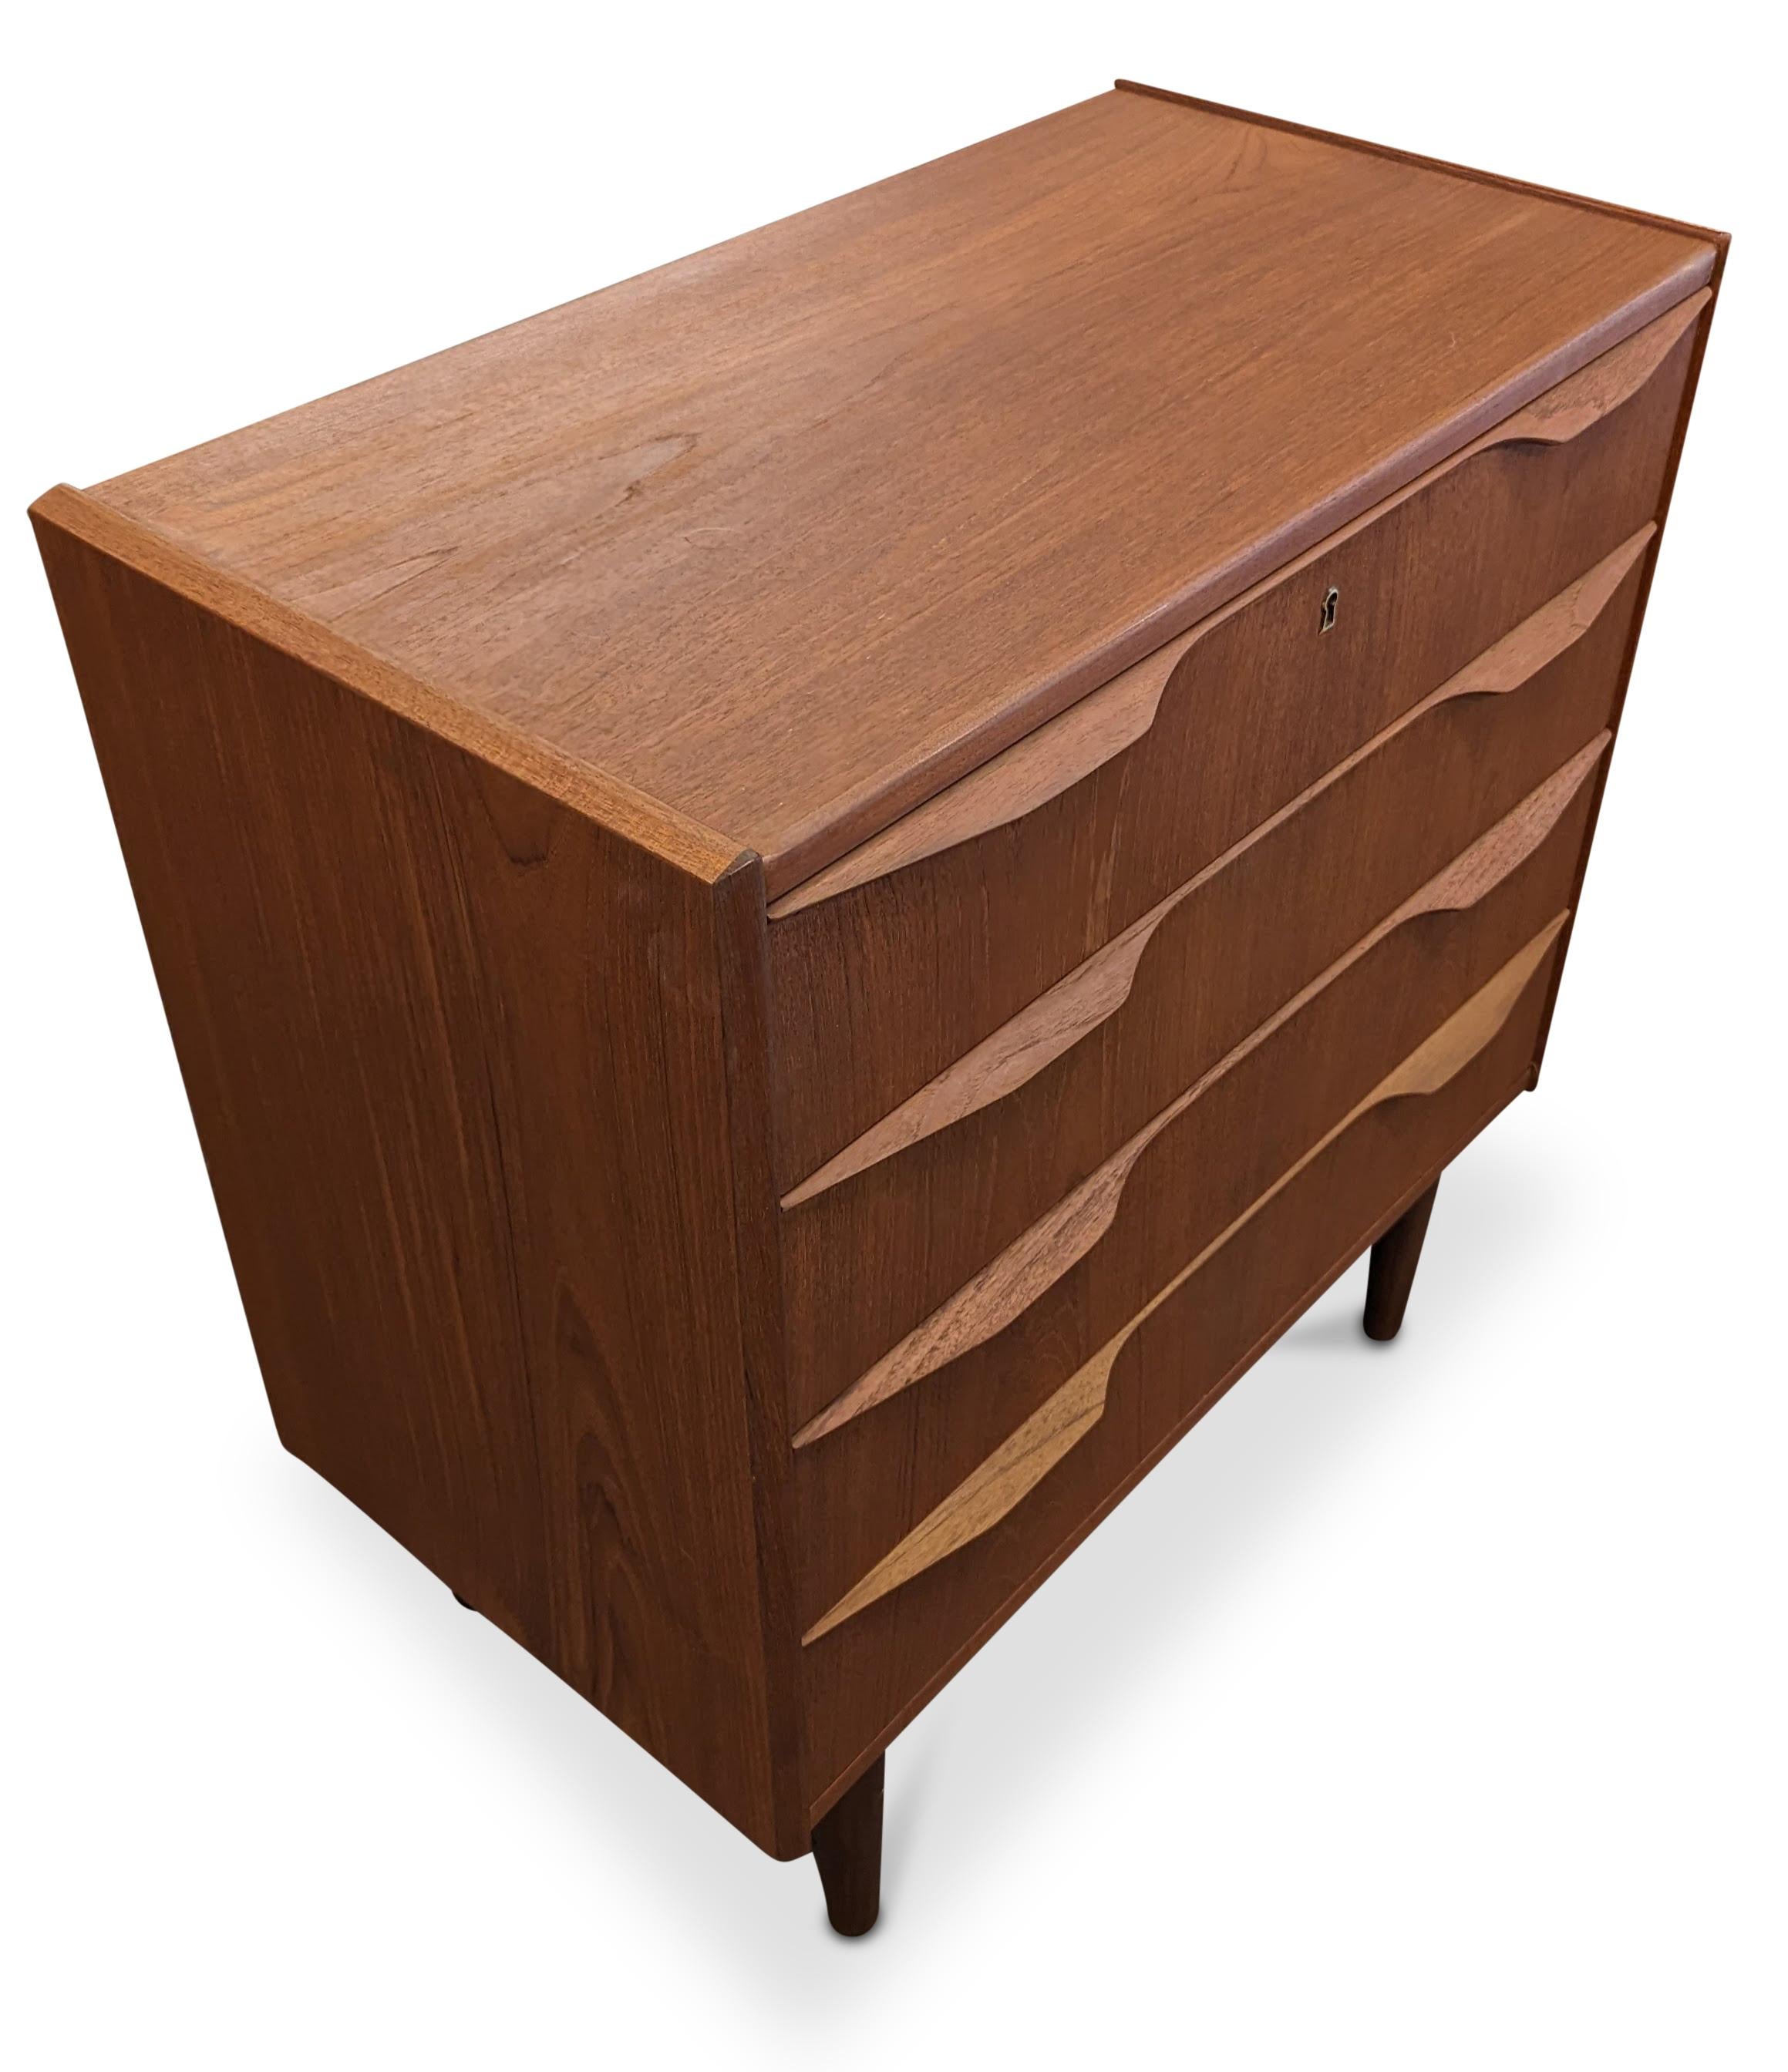 Vintage Danish Mid-Century Modern, made in the 1950s - Recently refurbished

The piece is more than 65+ years old and some wear and tear can be expected, but we do everything we can to refurbish them in respect to the design.

There is a science